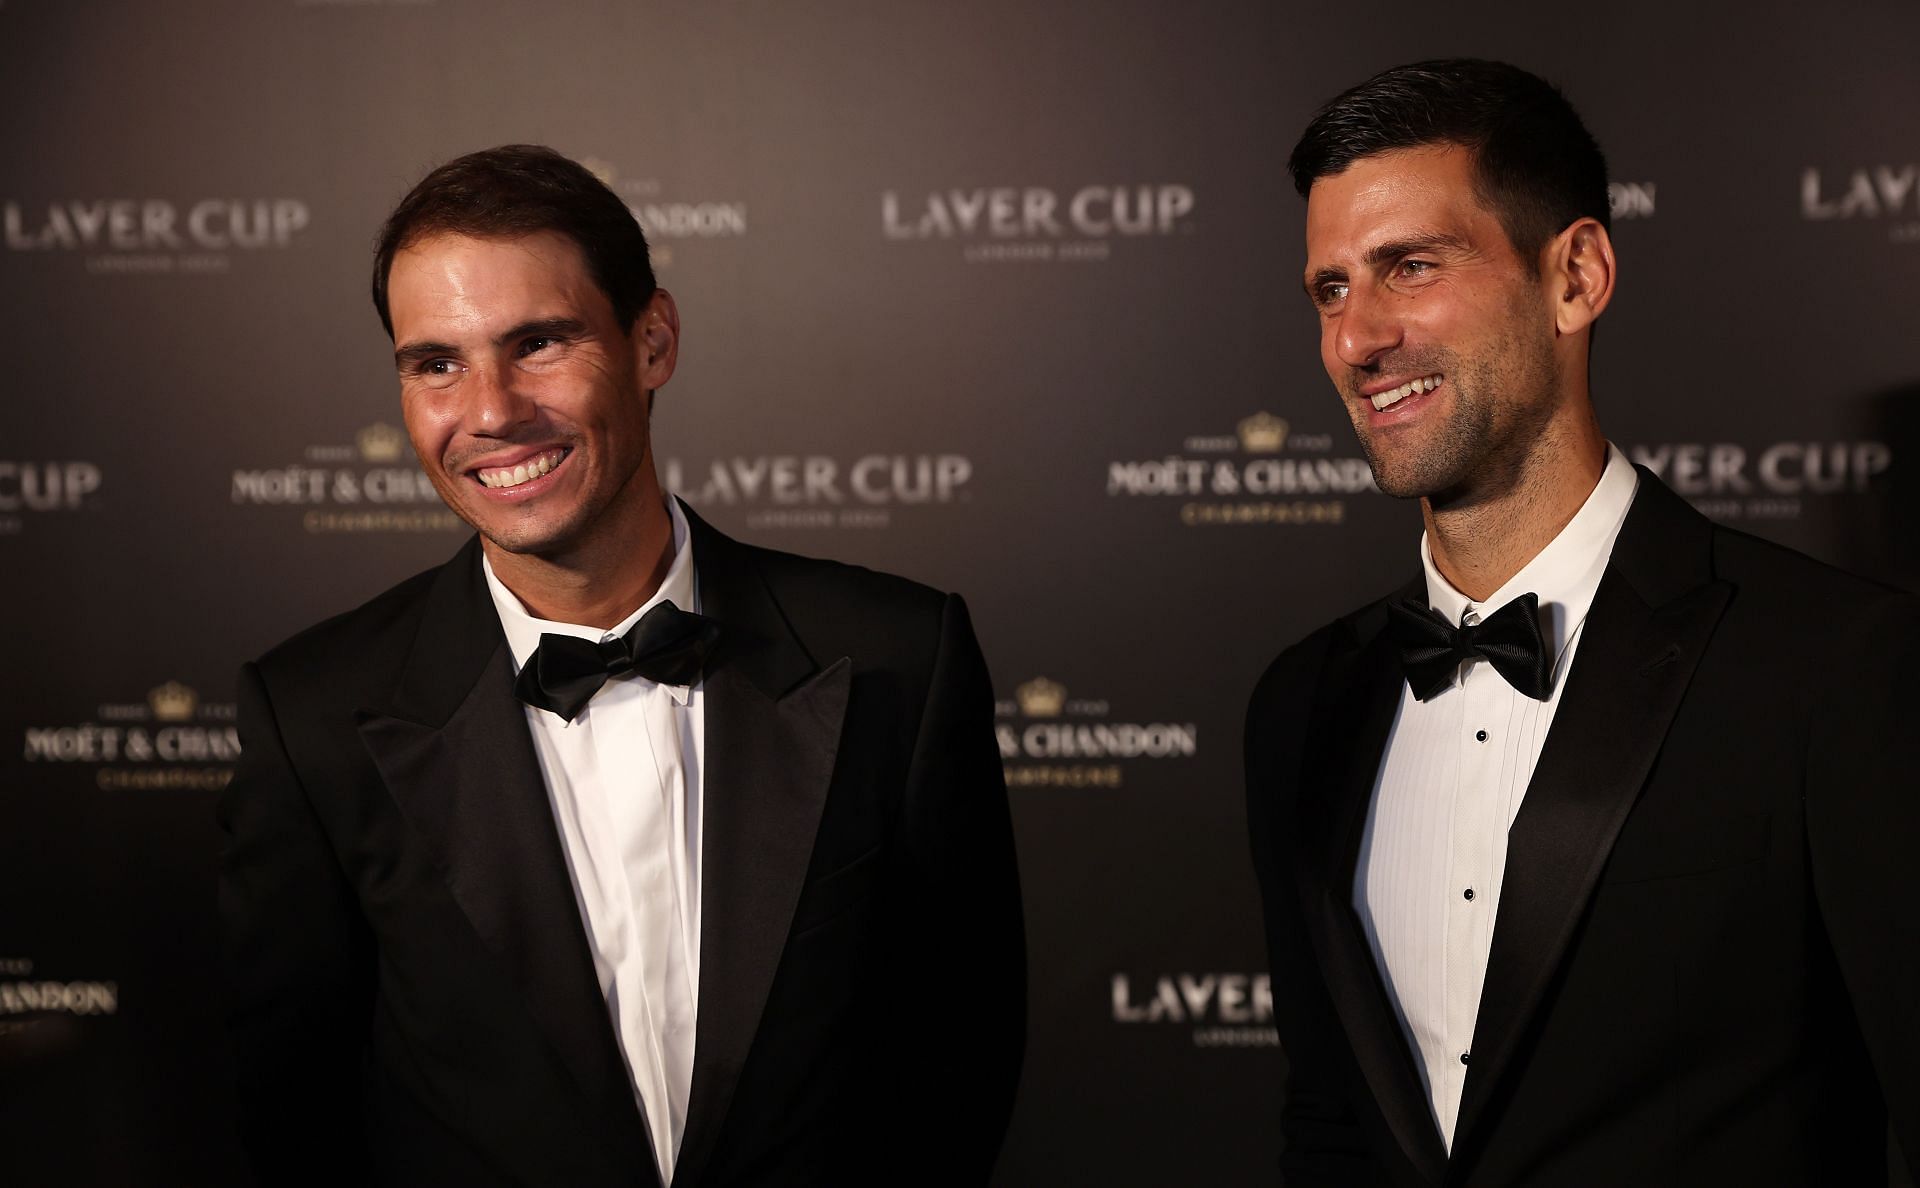 The two players came together for the Laver Cup for the first time this year.